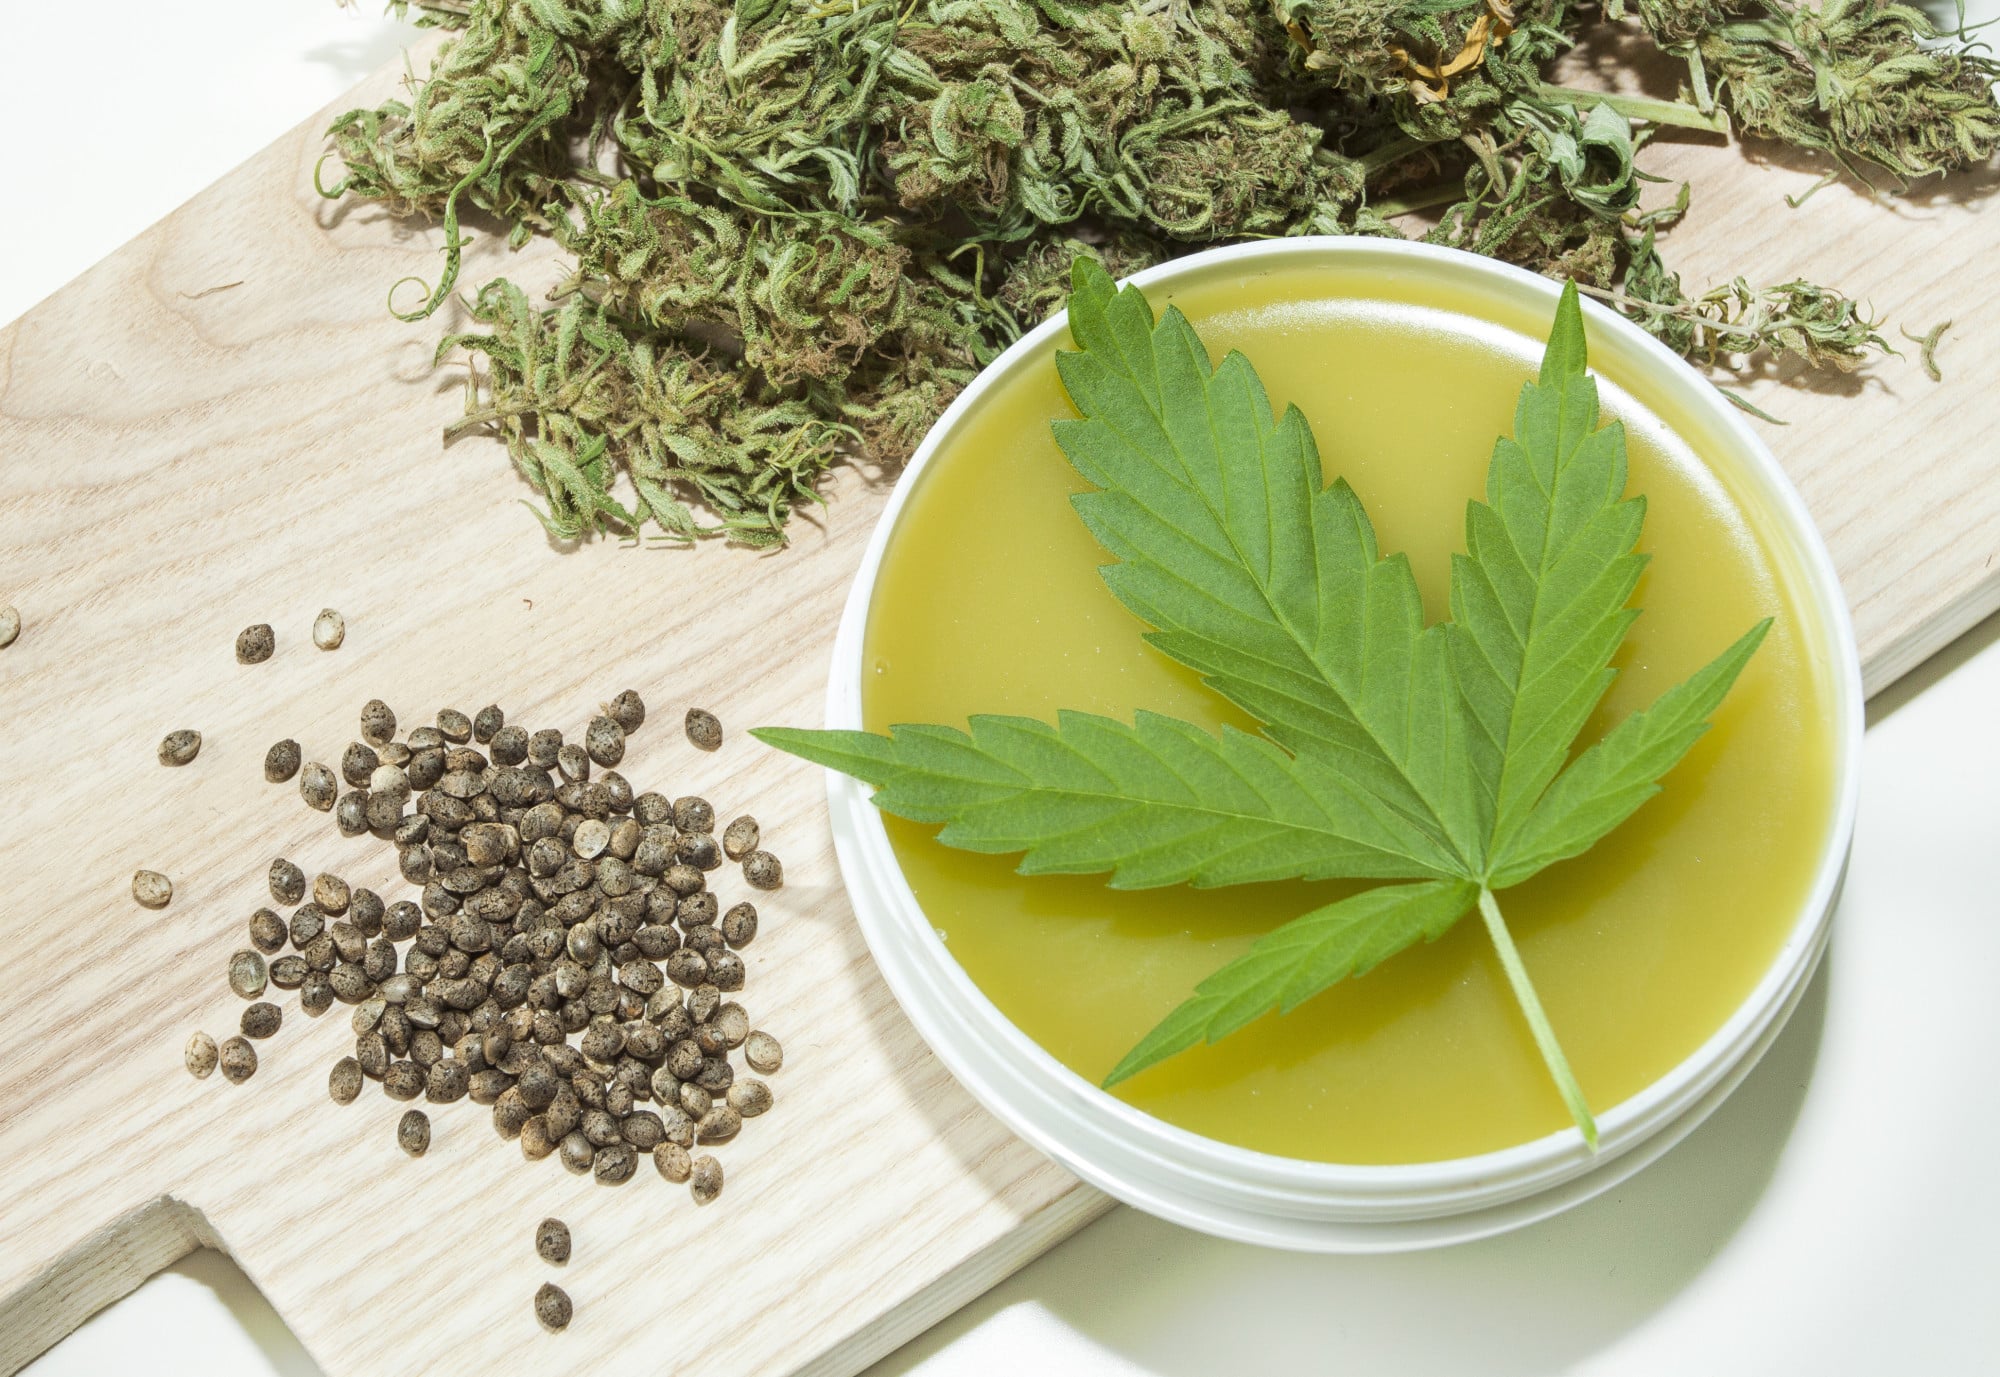 How to Make Hemp Seed Oil: A Complete Guide